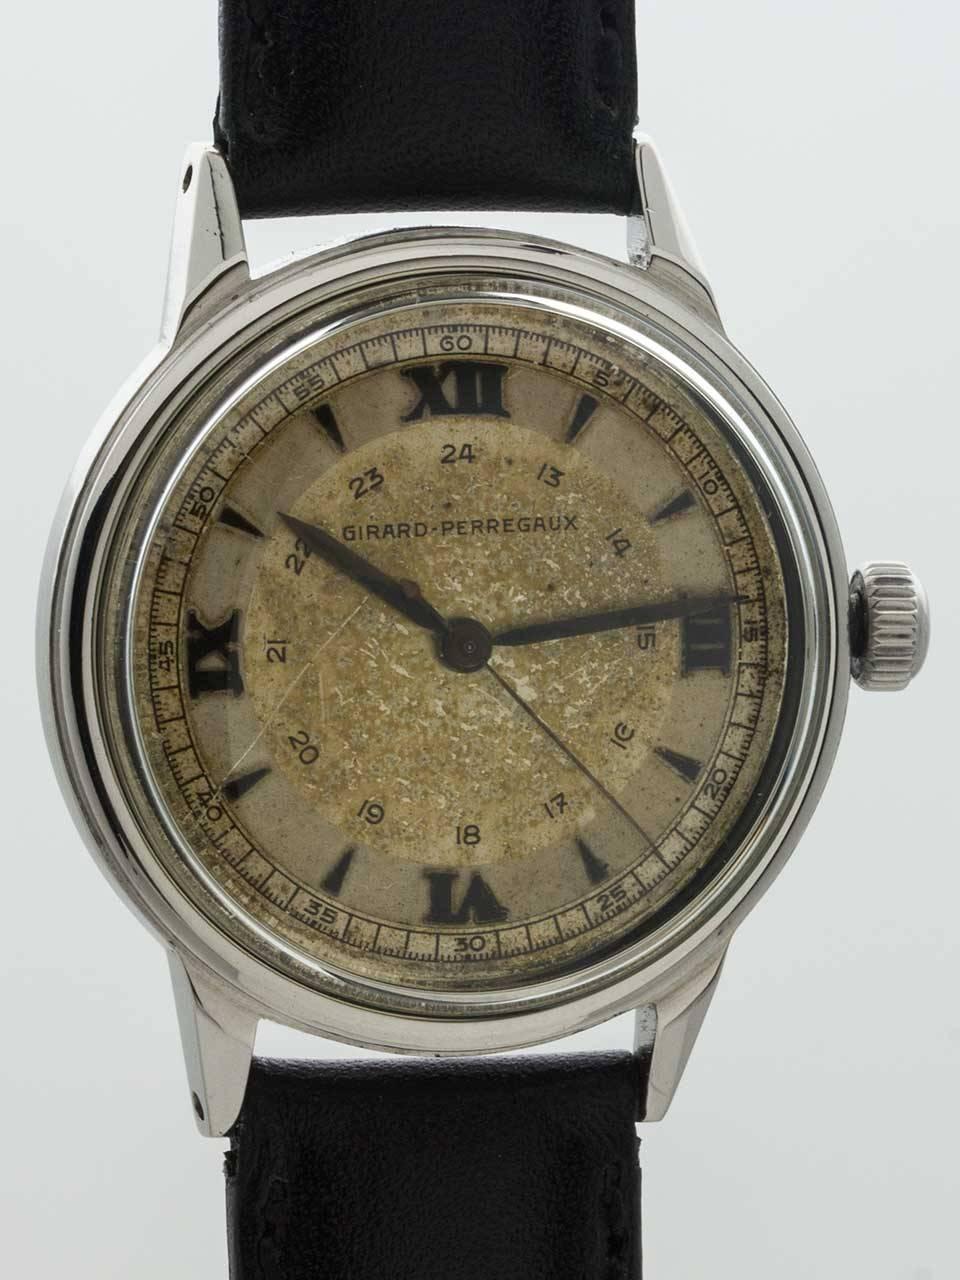 
Vintage Girard Perregaux dress model circa 1950’s. Medium size 31.5 x 38mm snap back case with acrylic crystal and interesting distressed original dial with rich character. Dial features luminous large Roman figures at quarters, and luminous bars